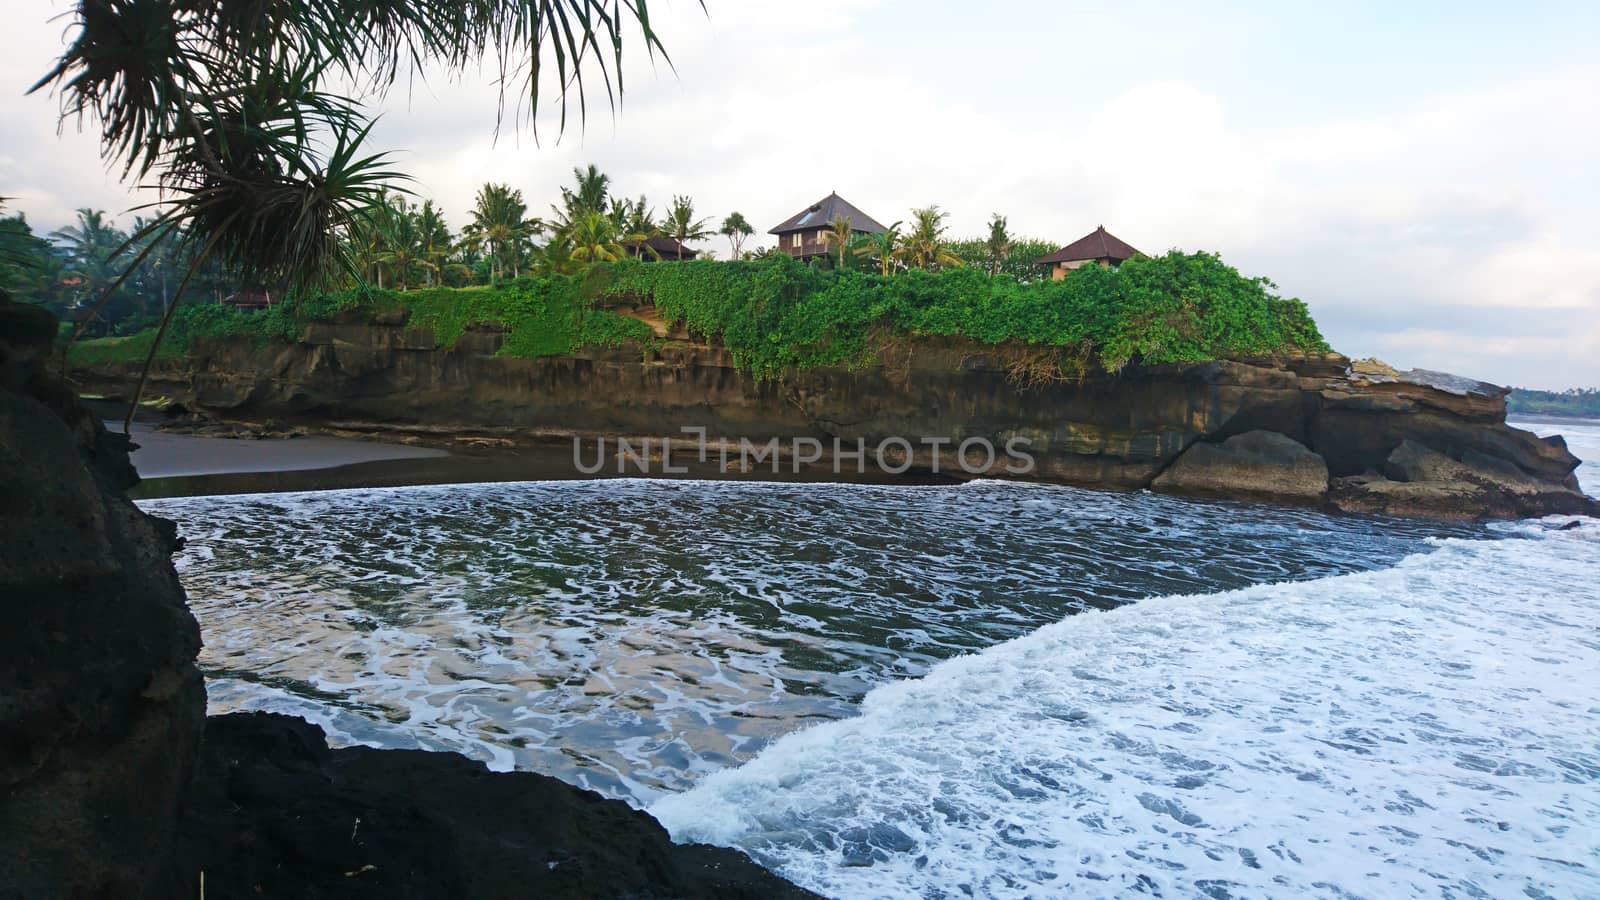 On the edge of the cliff are houses, the rocks are covered with palm trees and greenery. The earth is washed by large waves of the ocean. A Paradise on the island of Bali.